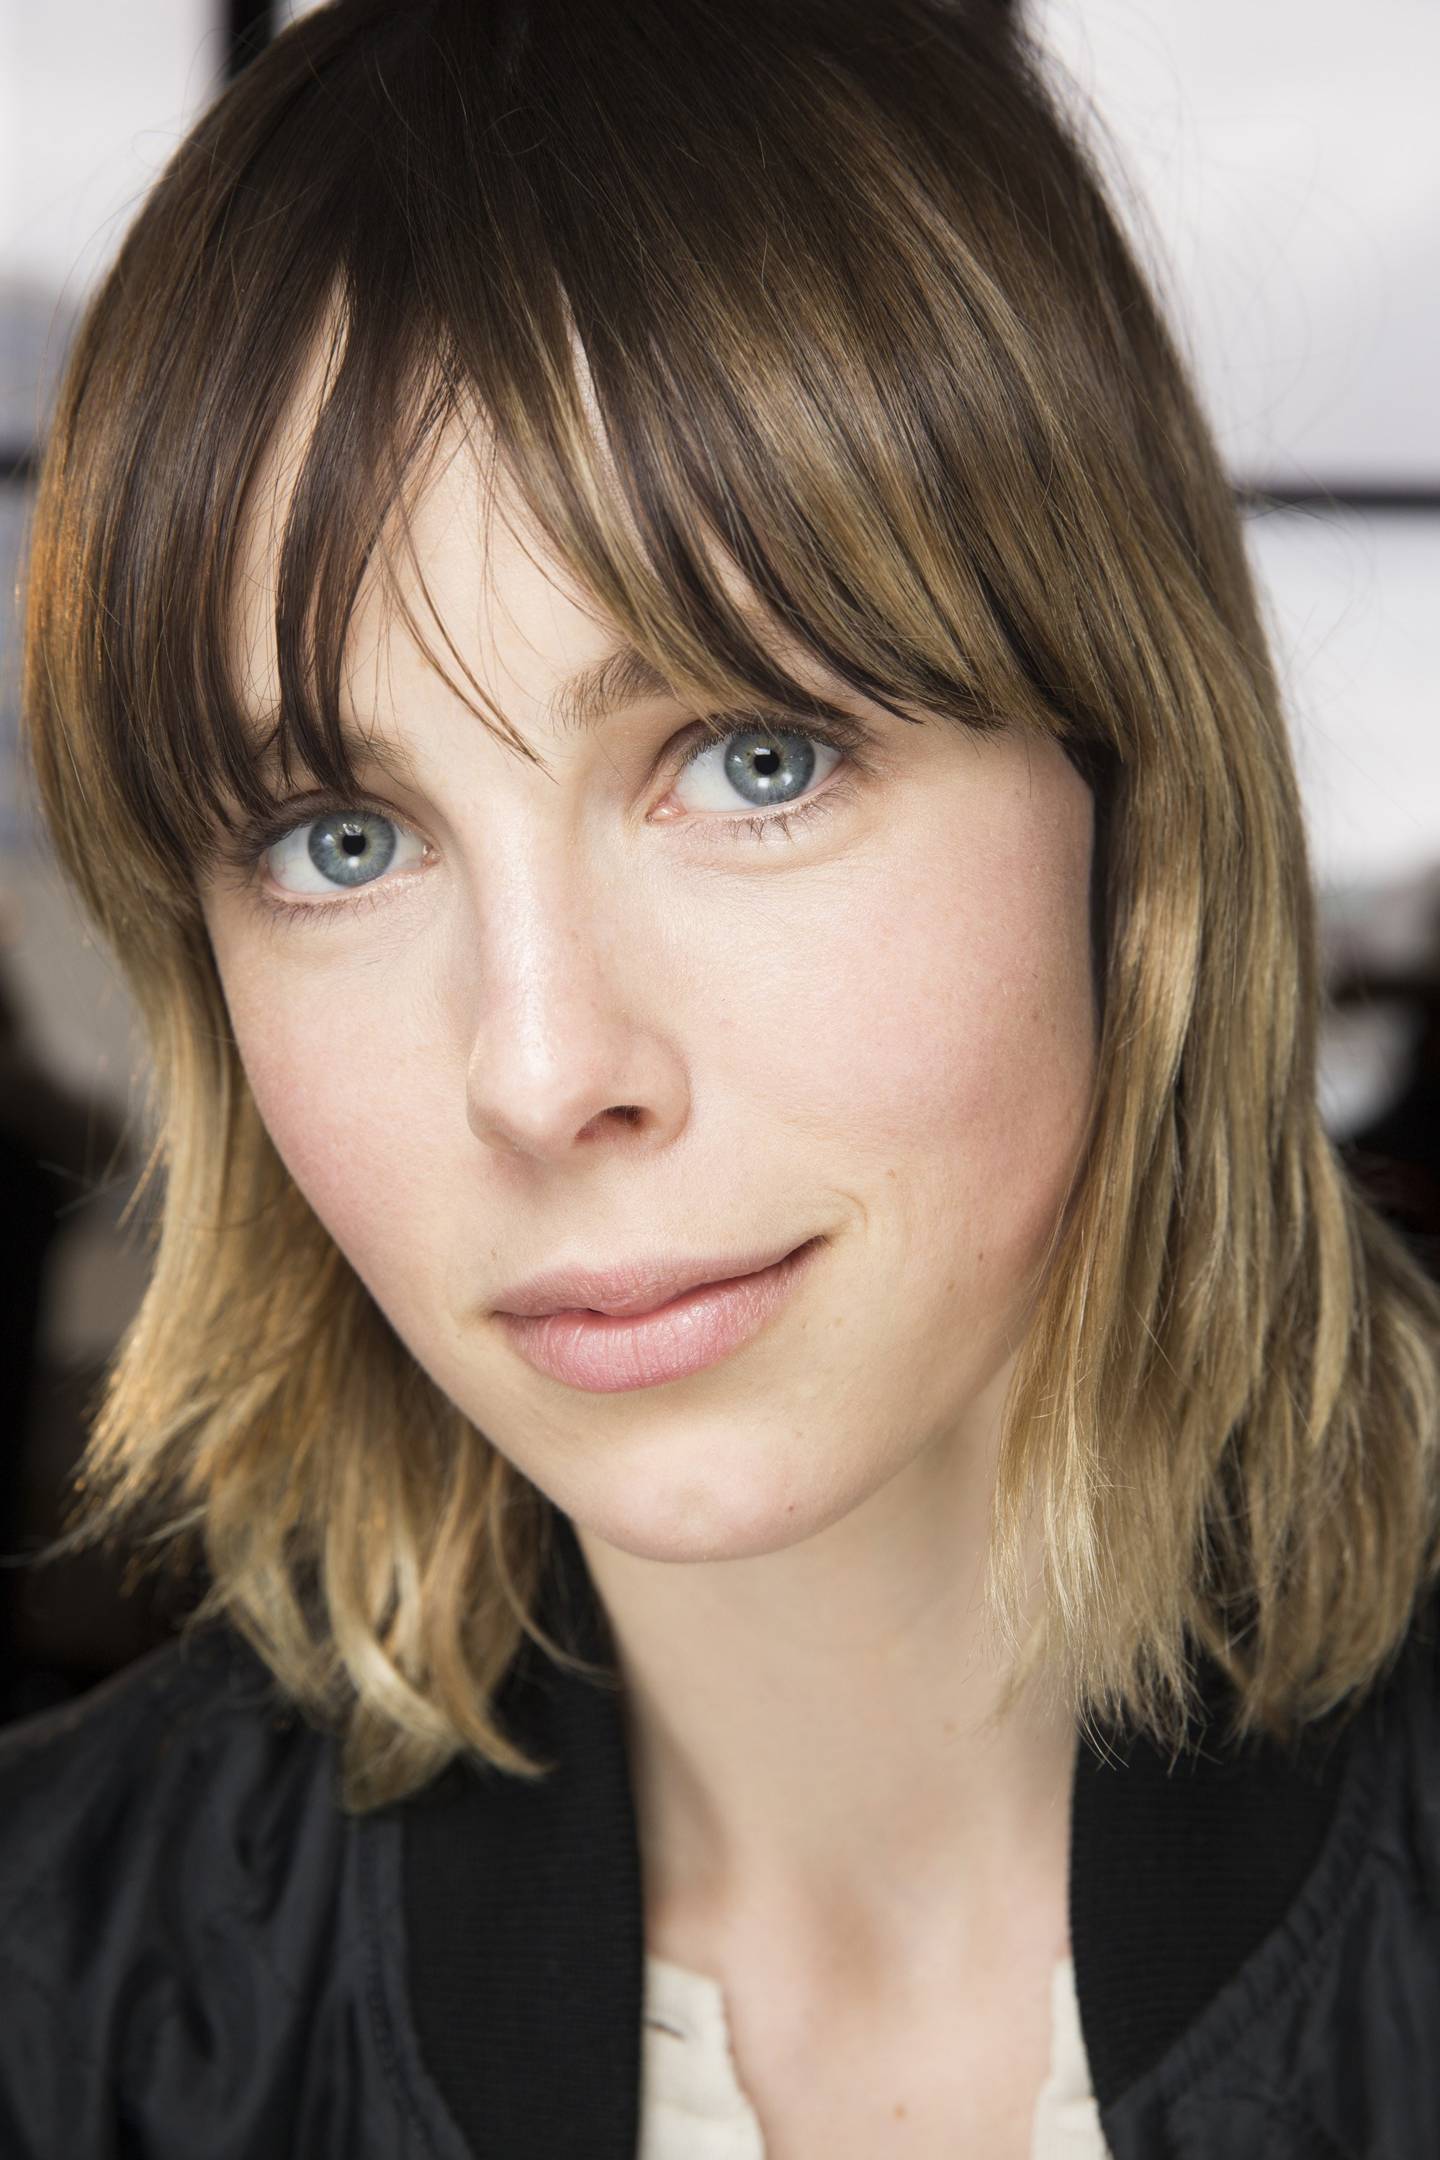 Light fringe ideas - commitment-free bangs easy to grow out | Glamour UK